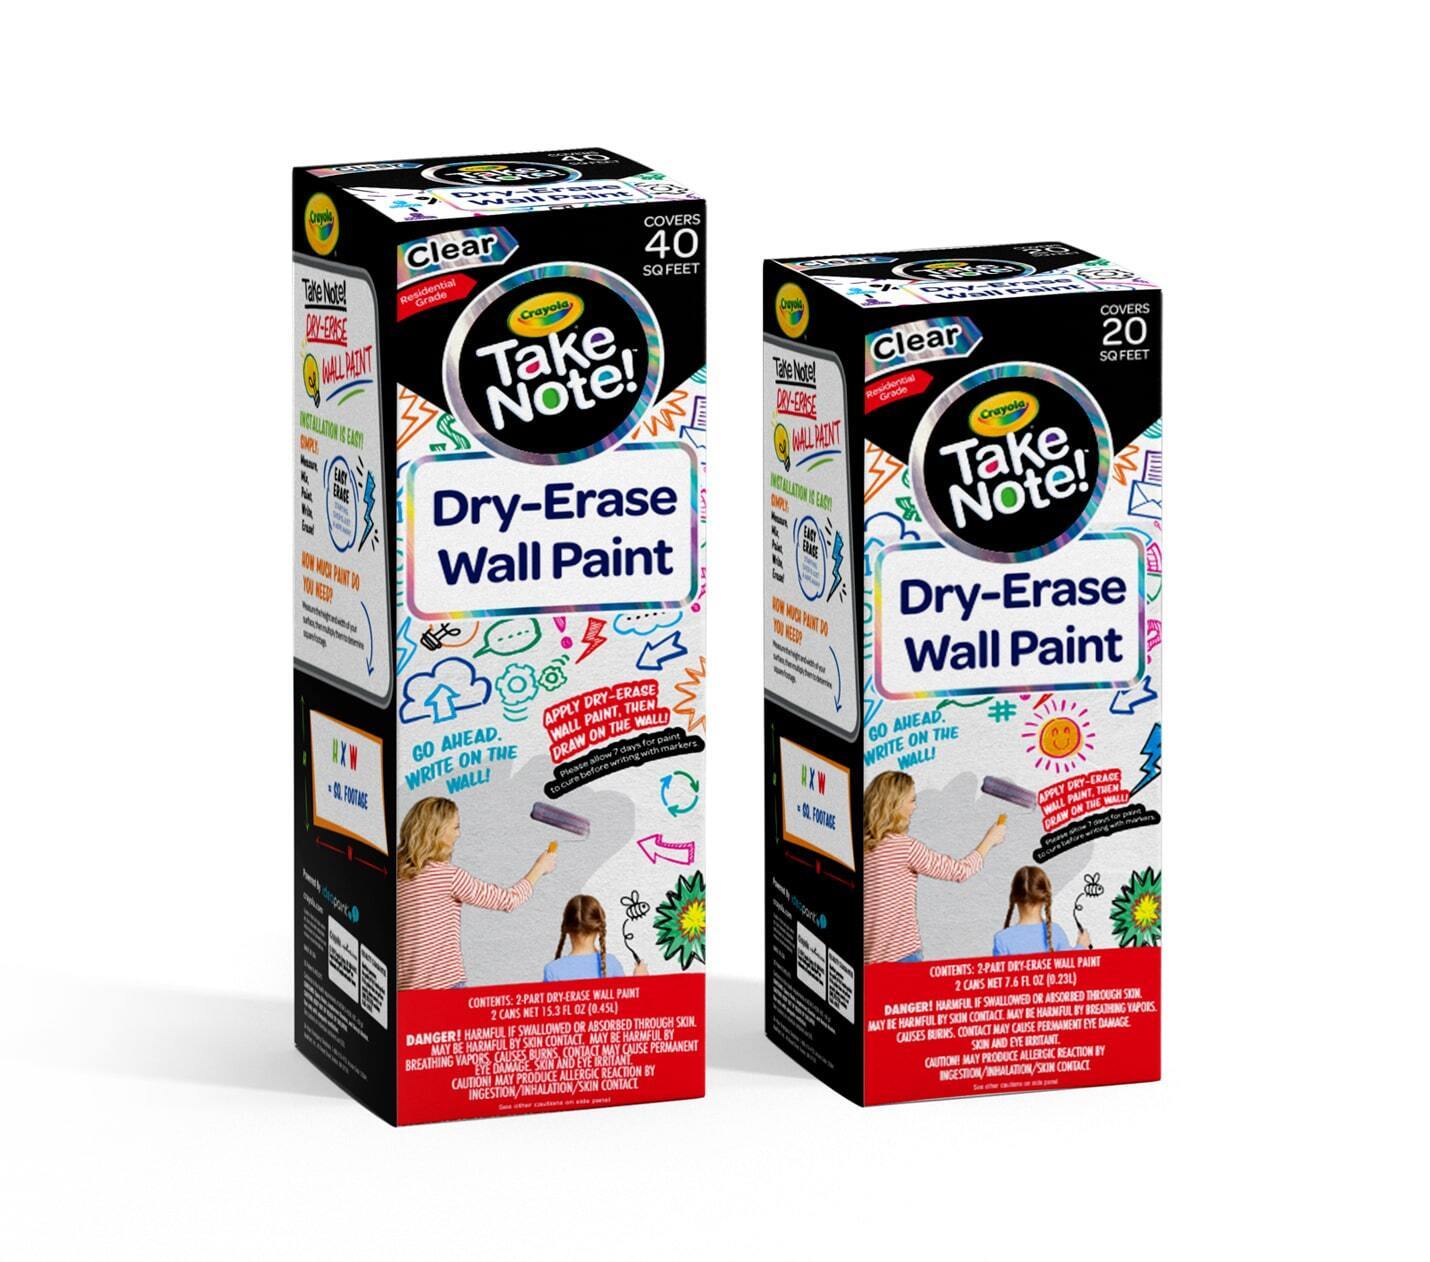 CRAYOLA® TAKE NOTE! DRY ERASE WALL PAINT 20 Sq Ft Kit-Exeter Paint Stores